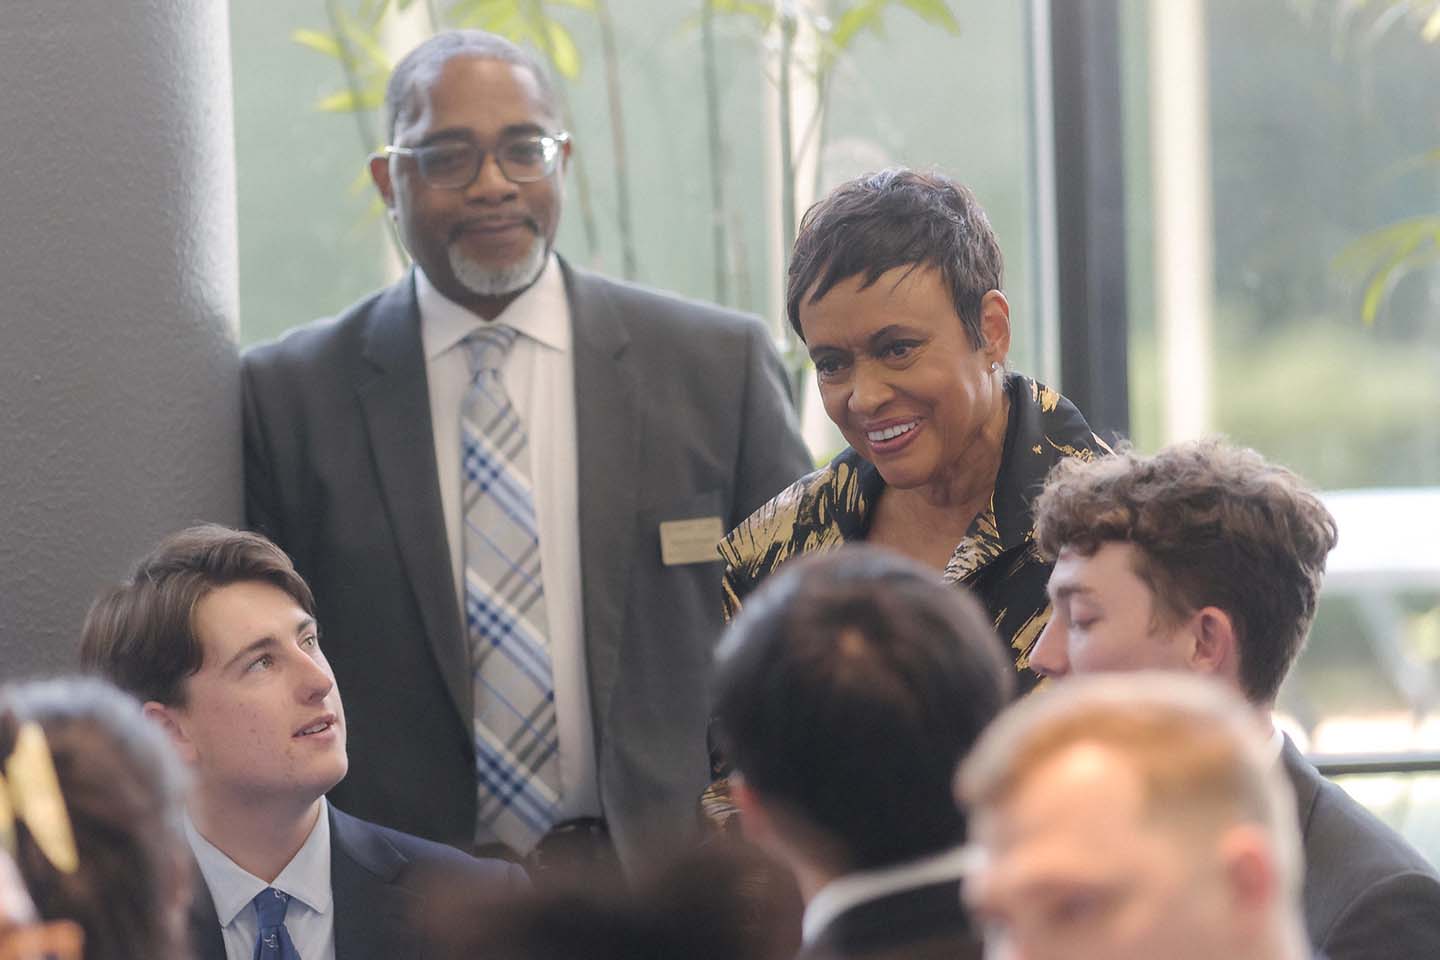 Judge Glenda Hatchett and Professionalism Director Derrick Howard mingling with Emory Law 1Ls at the Professionalism Day reception